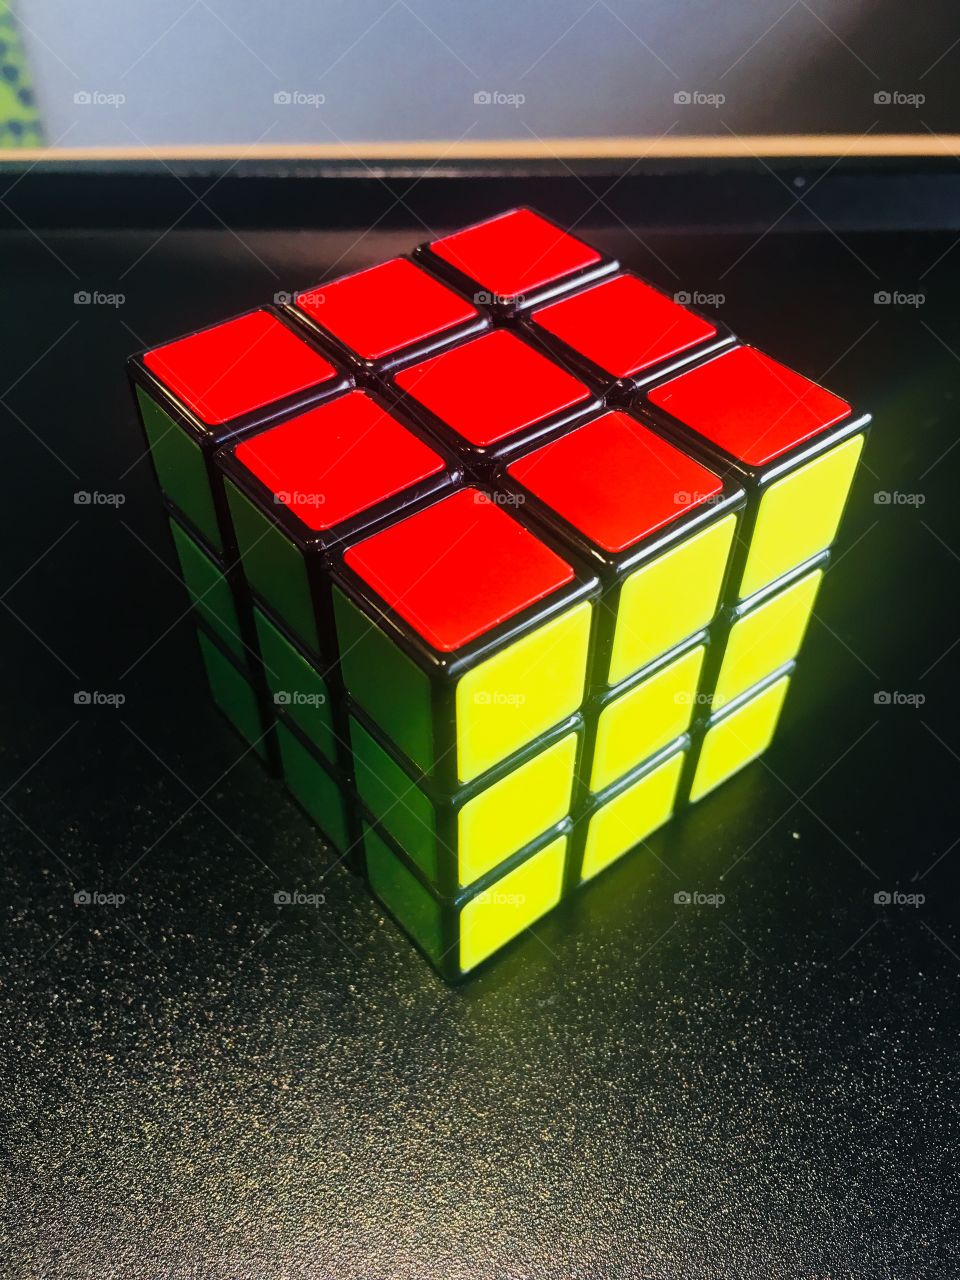 The red and yellow cube